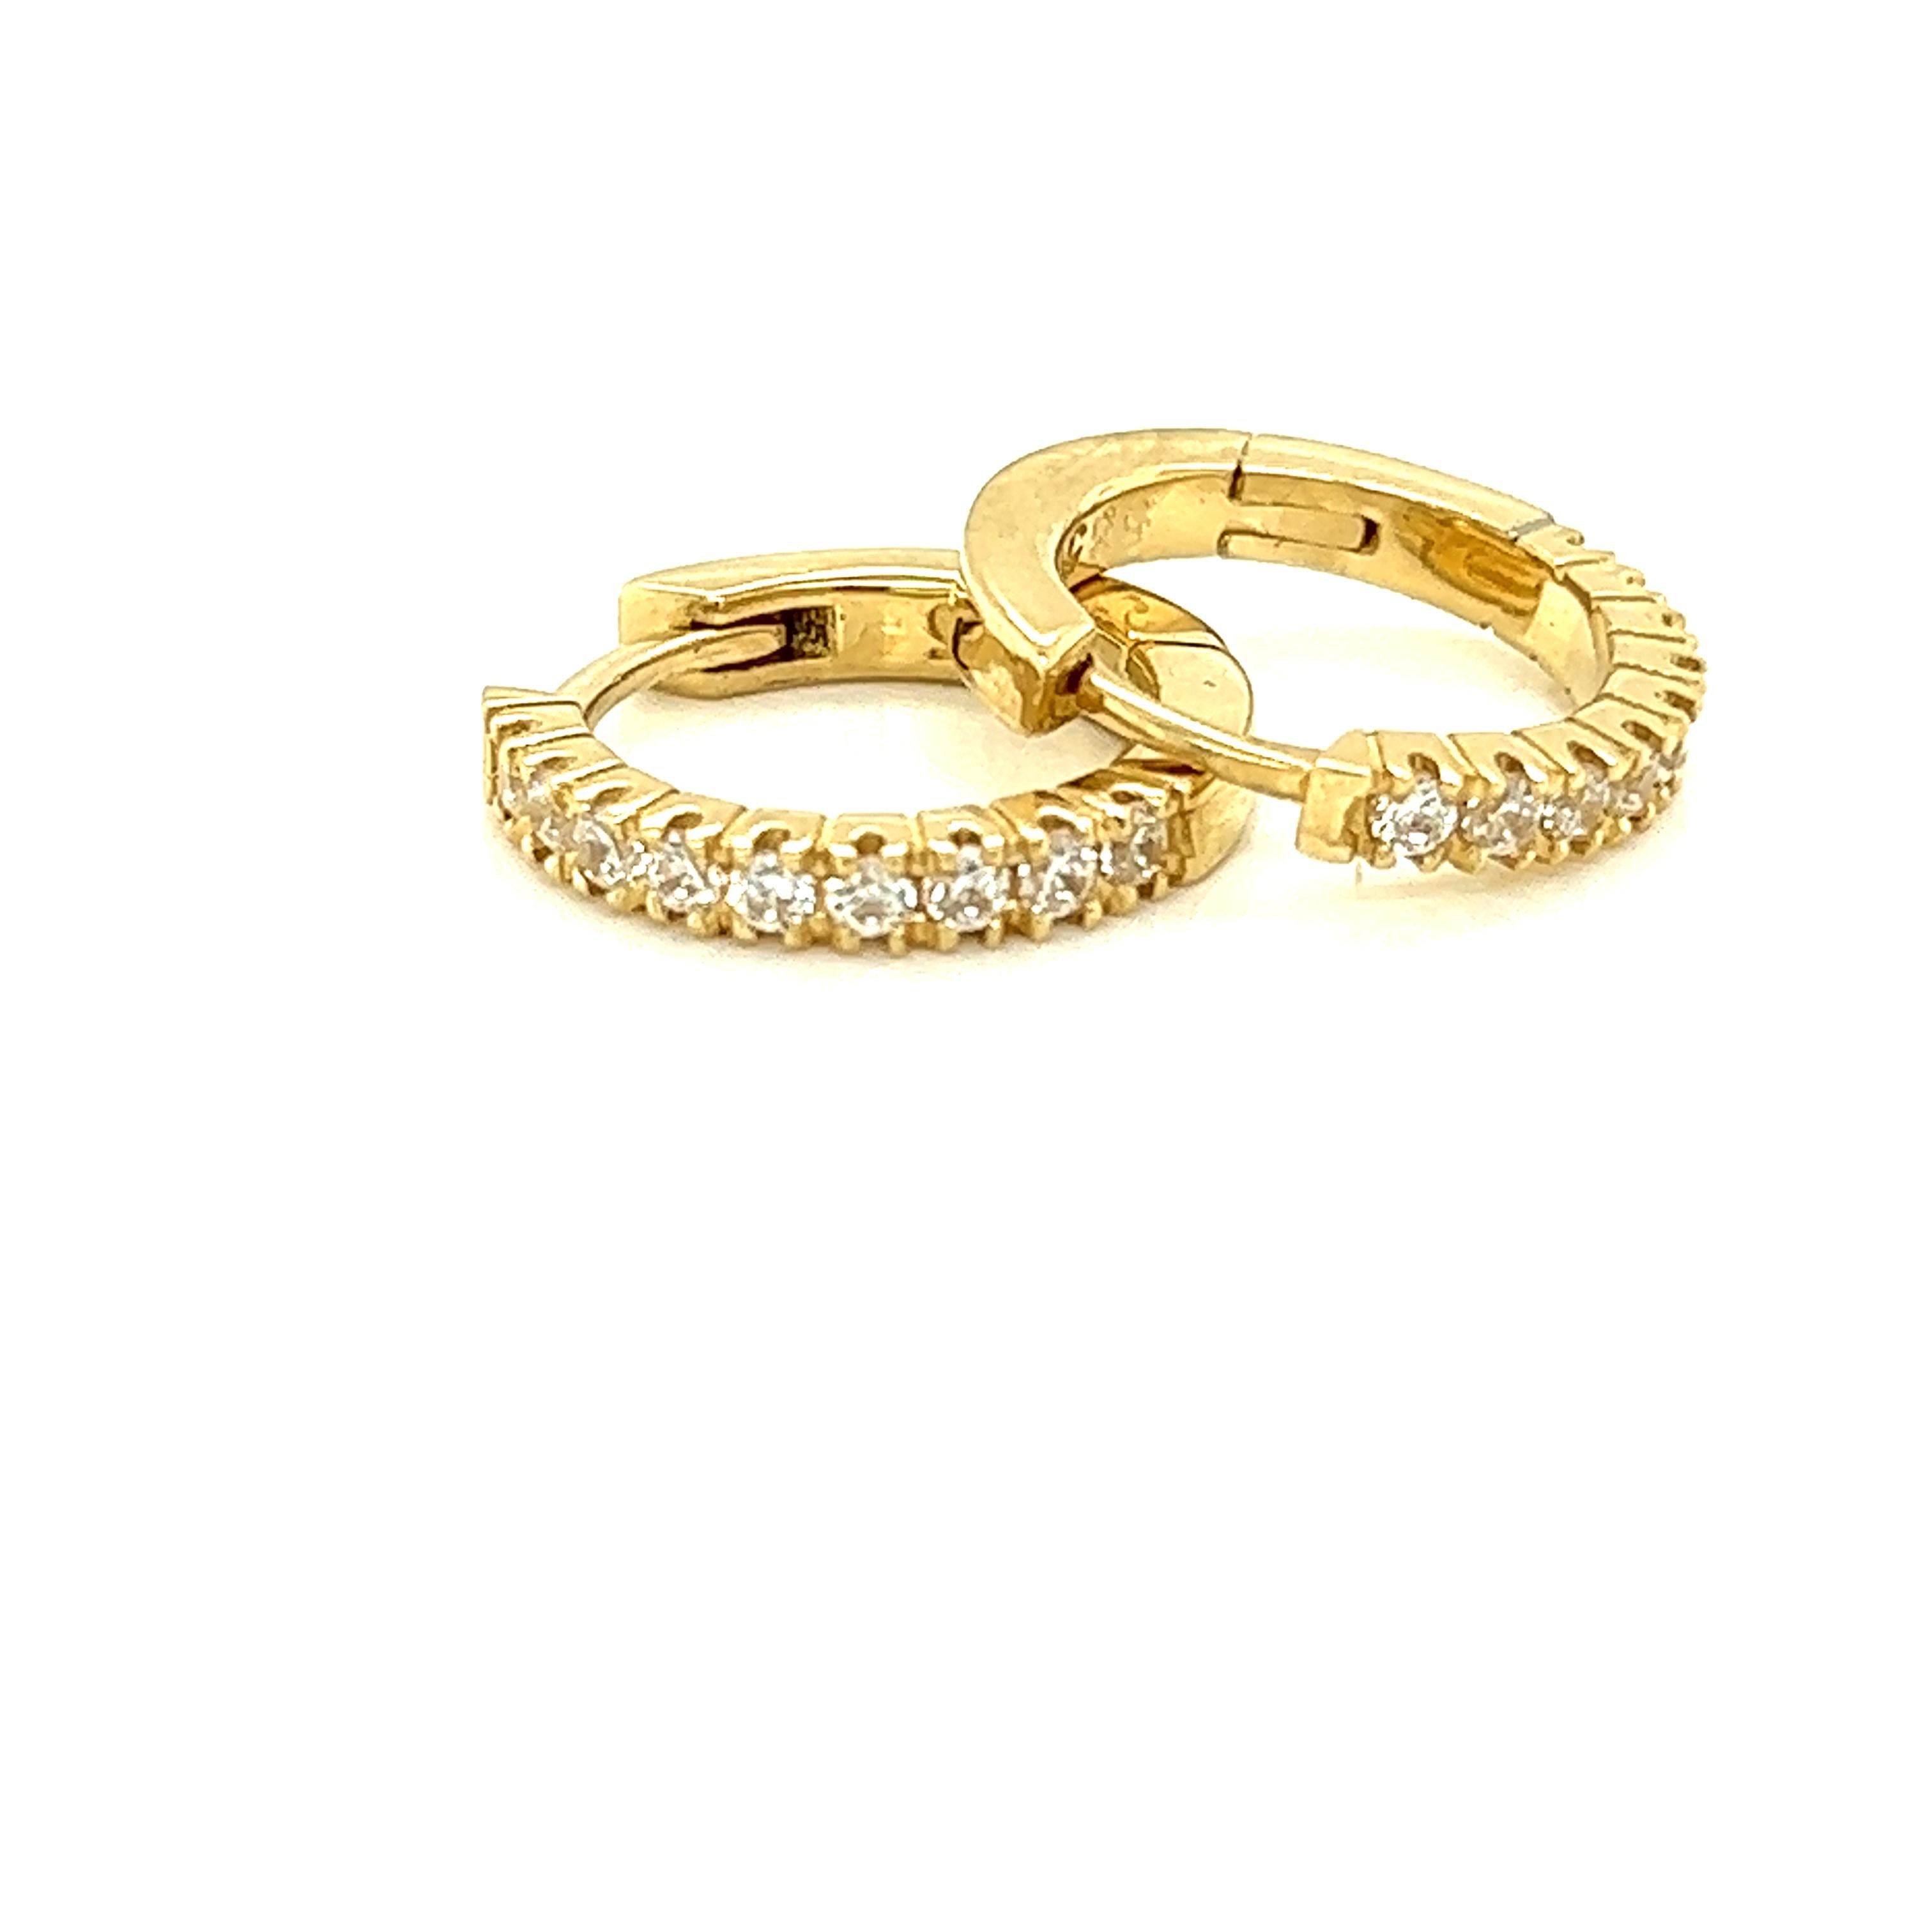 14 Karat Yellow Gold Hand-Crafted Polish-Finished 15mm Diamond Hoop Earrings, Set with 0.50 Carat Diamonds and a Hinge-Back Closure.
